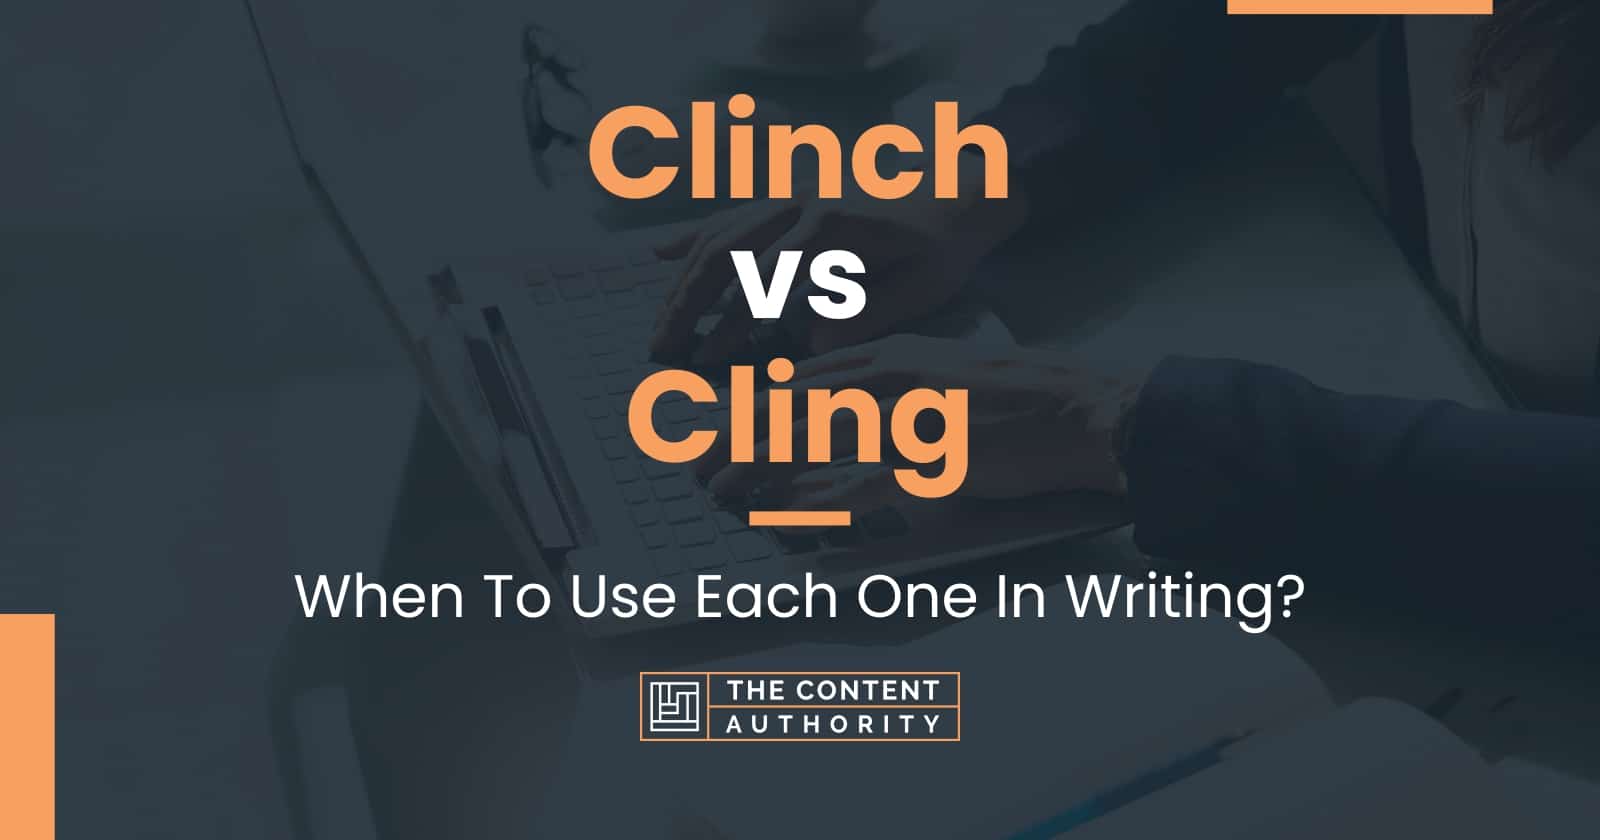 Define Clinch, Clinch Meaning, Clinch Examples, Clinch Synonyms